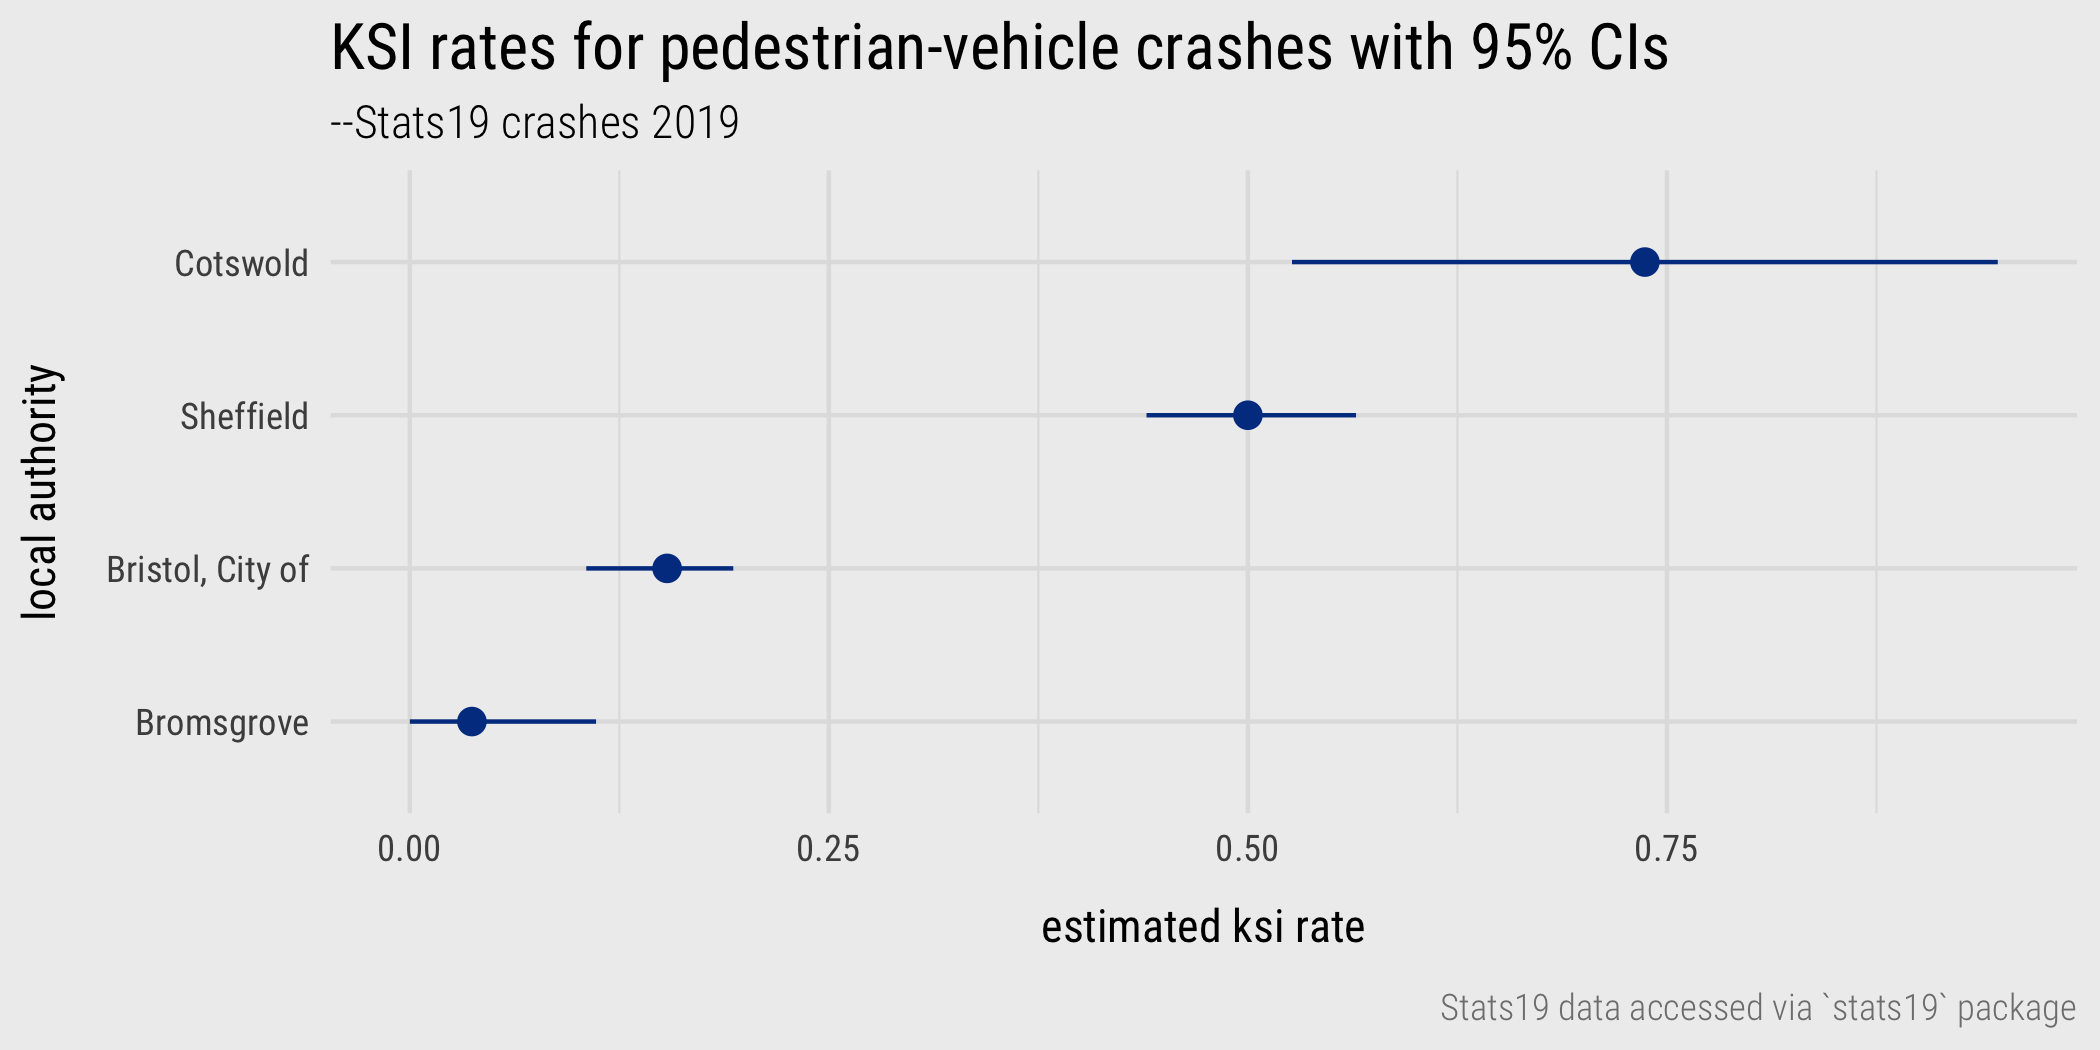 KSI rates for pedestrian-vehicle crashes in selected local authorities with 95% CIs (derived from 1000 resample bootstraps).